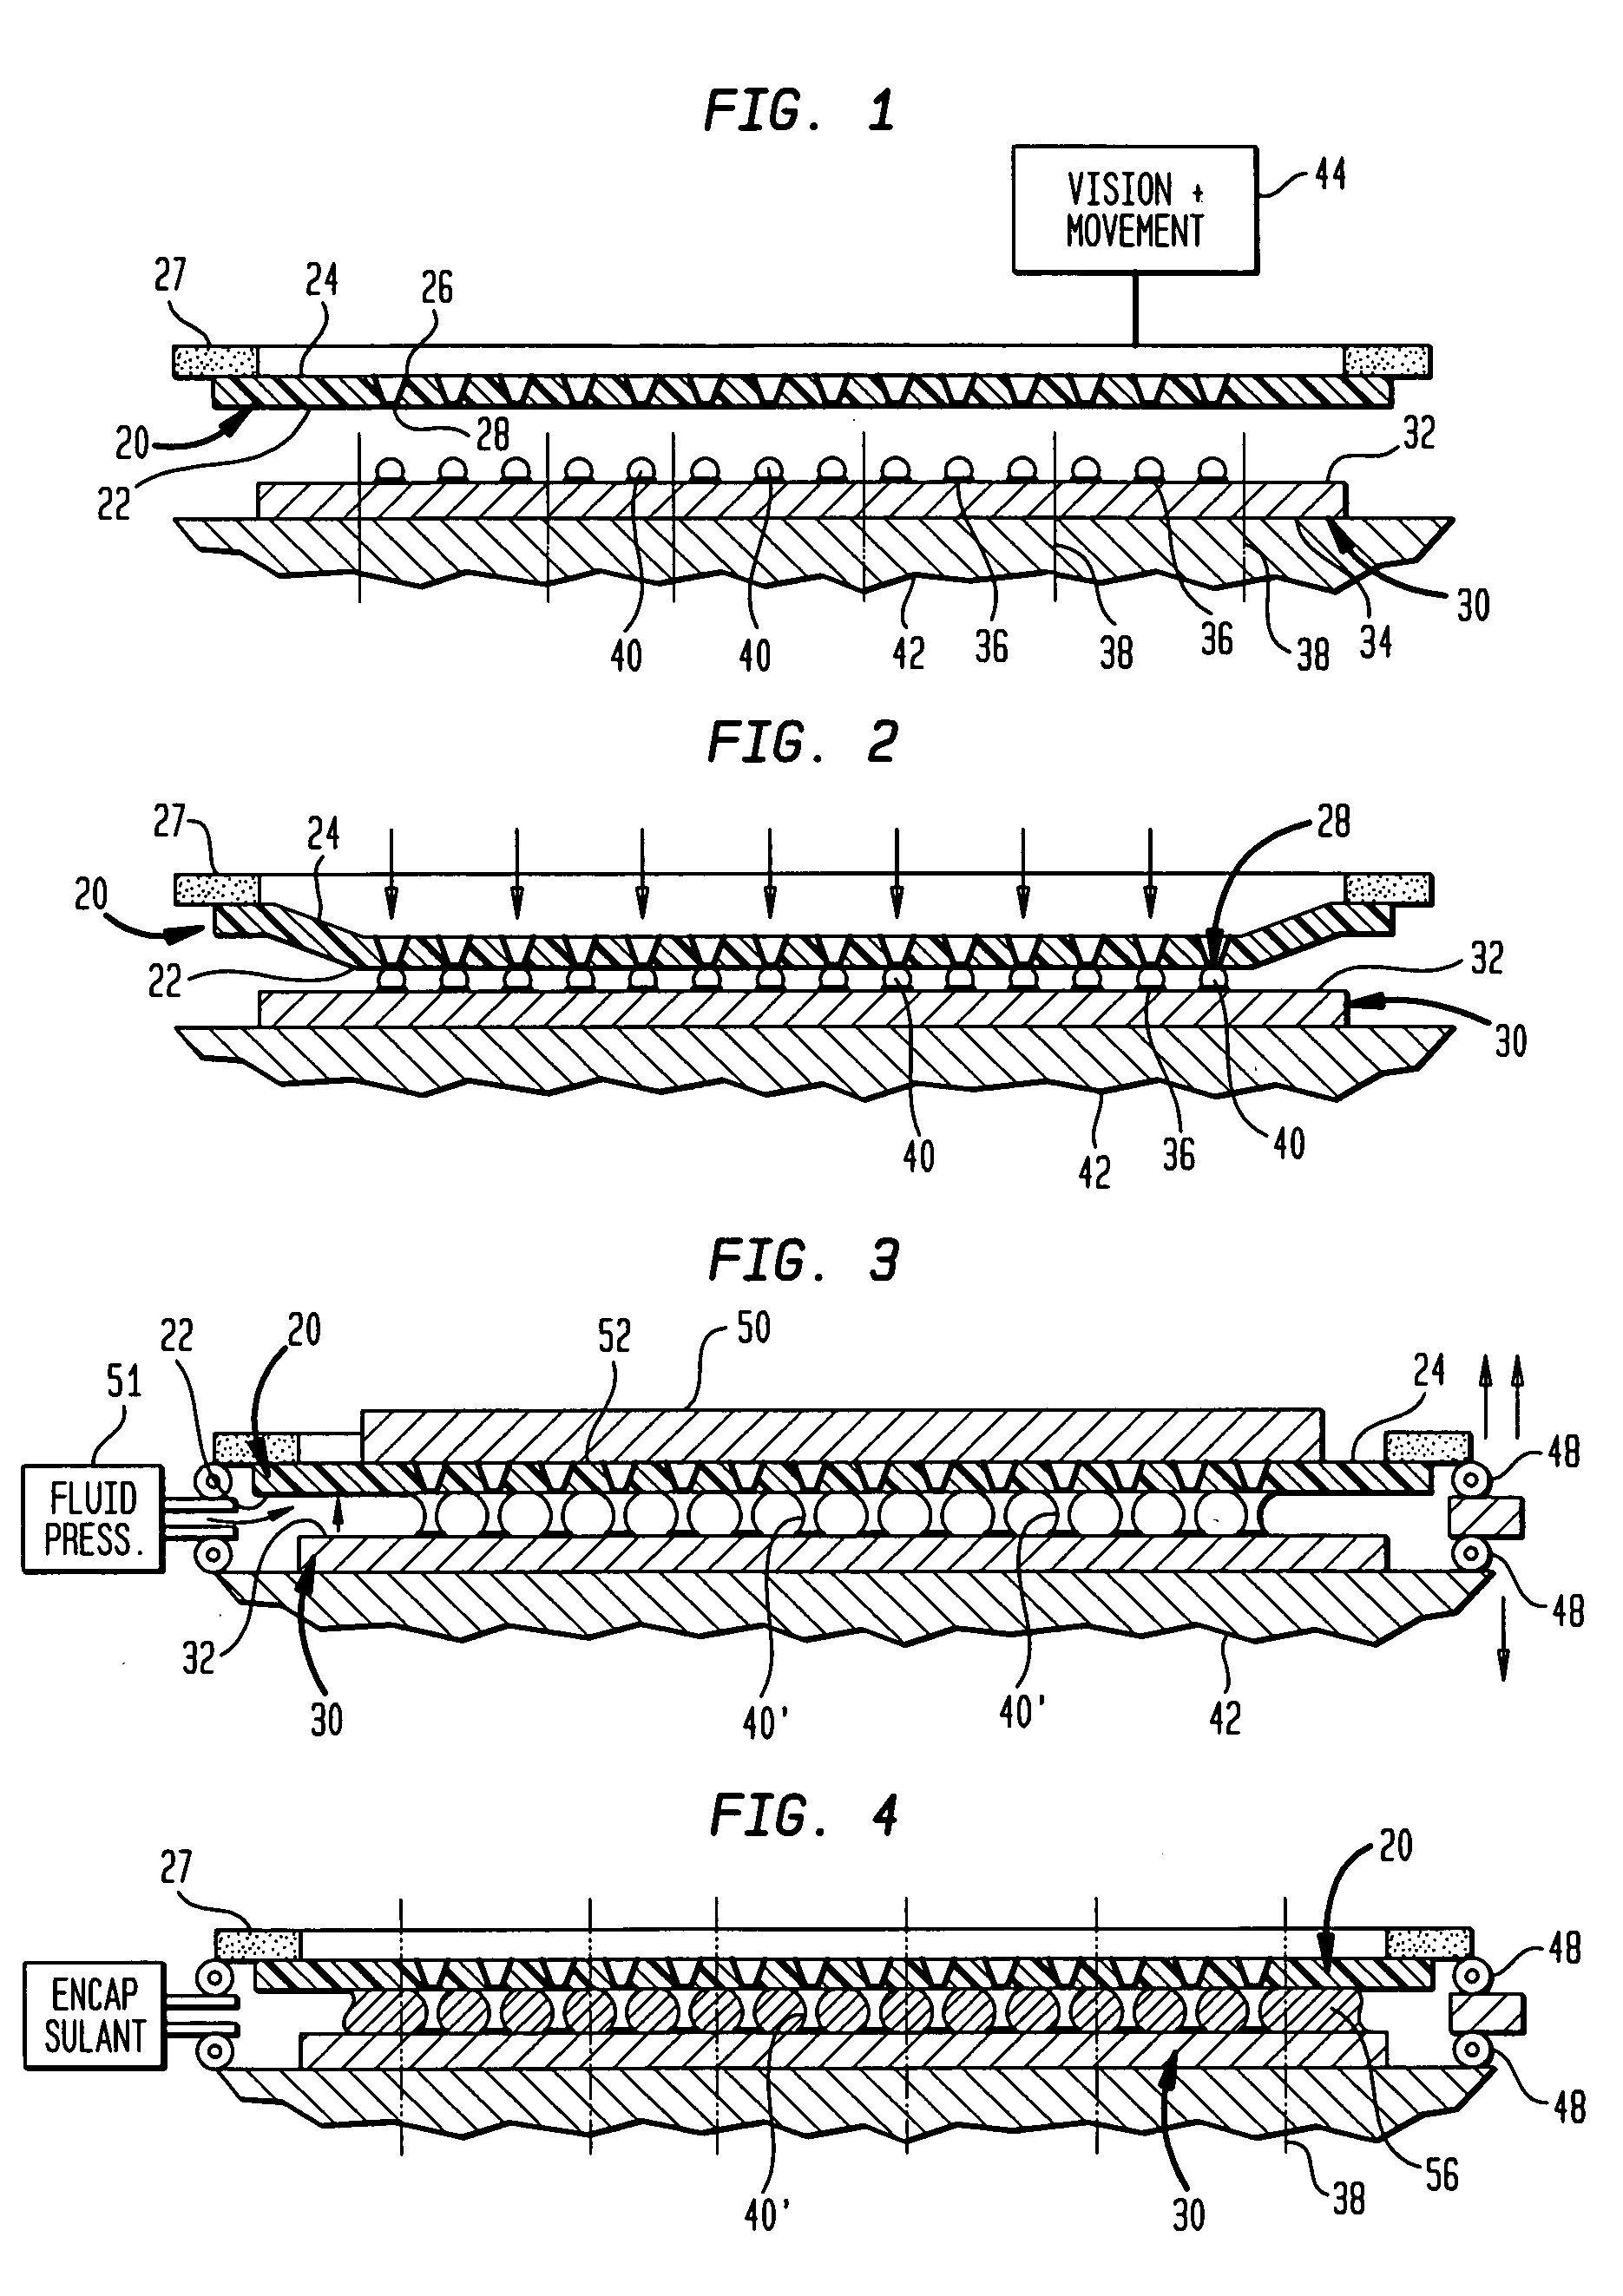 Microelectronic packages with solder interconnections